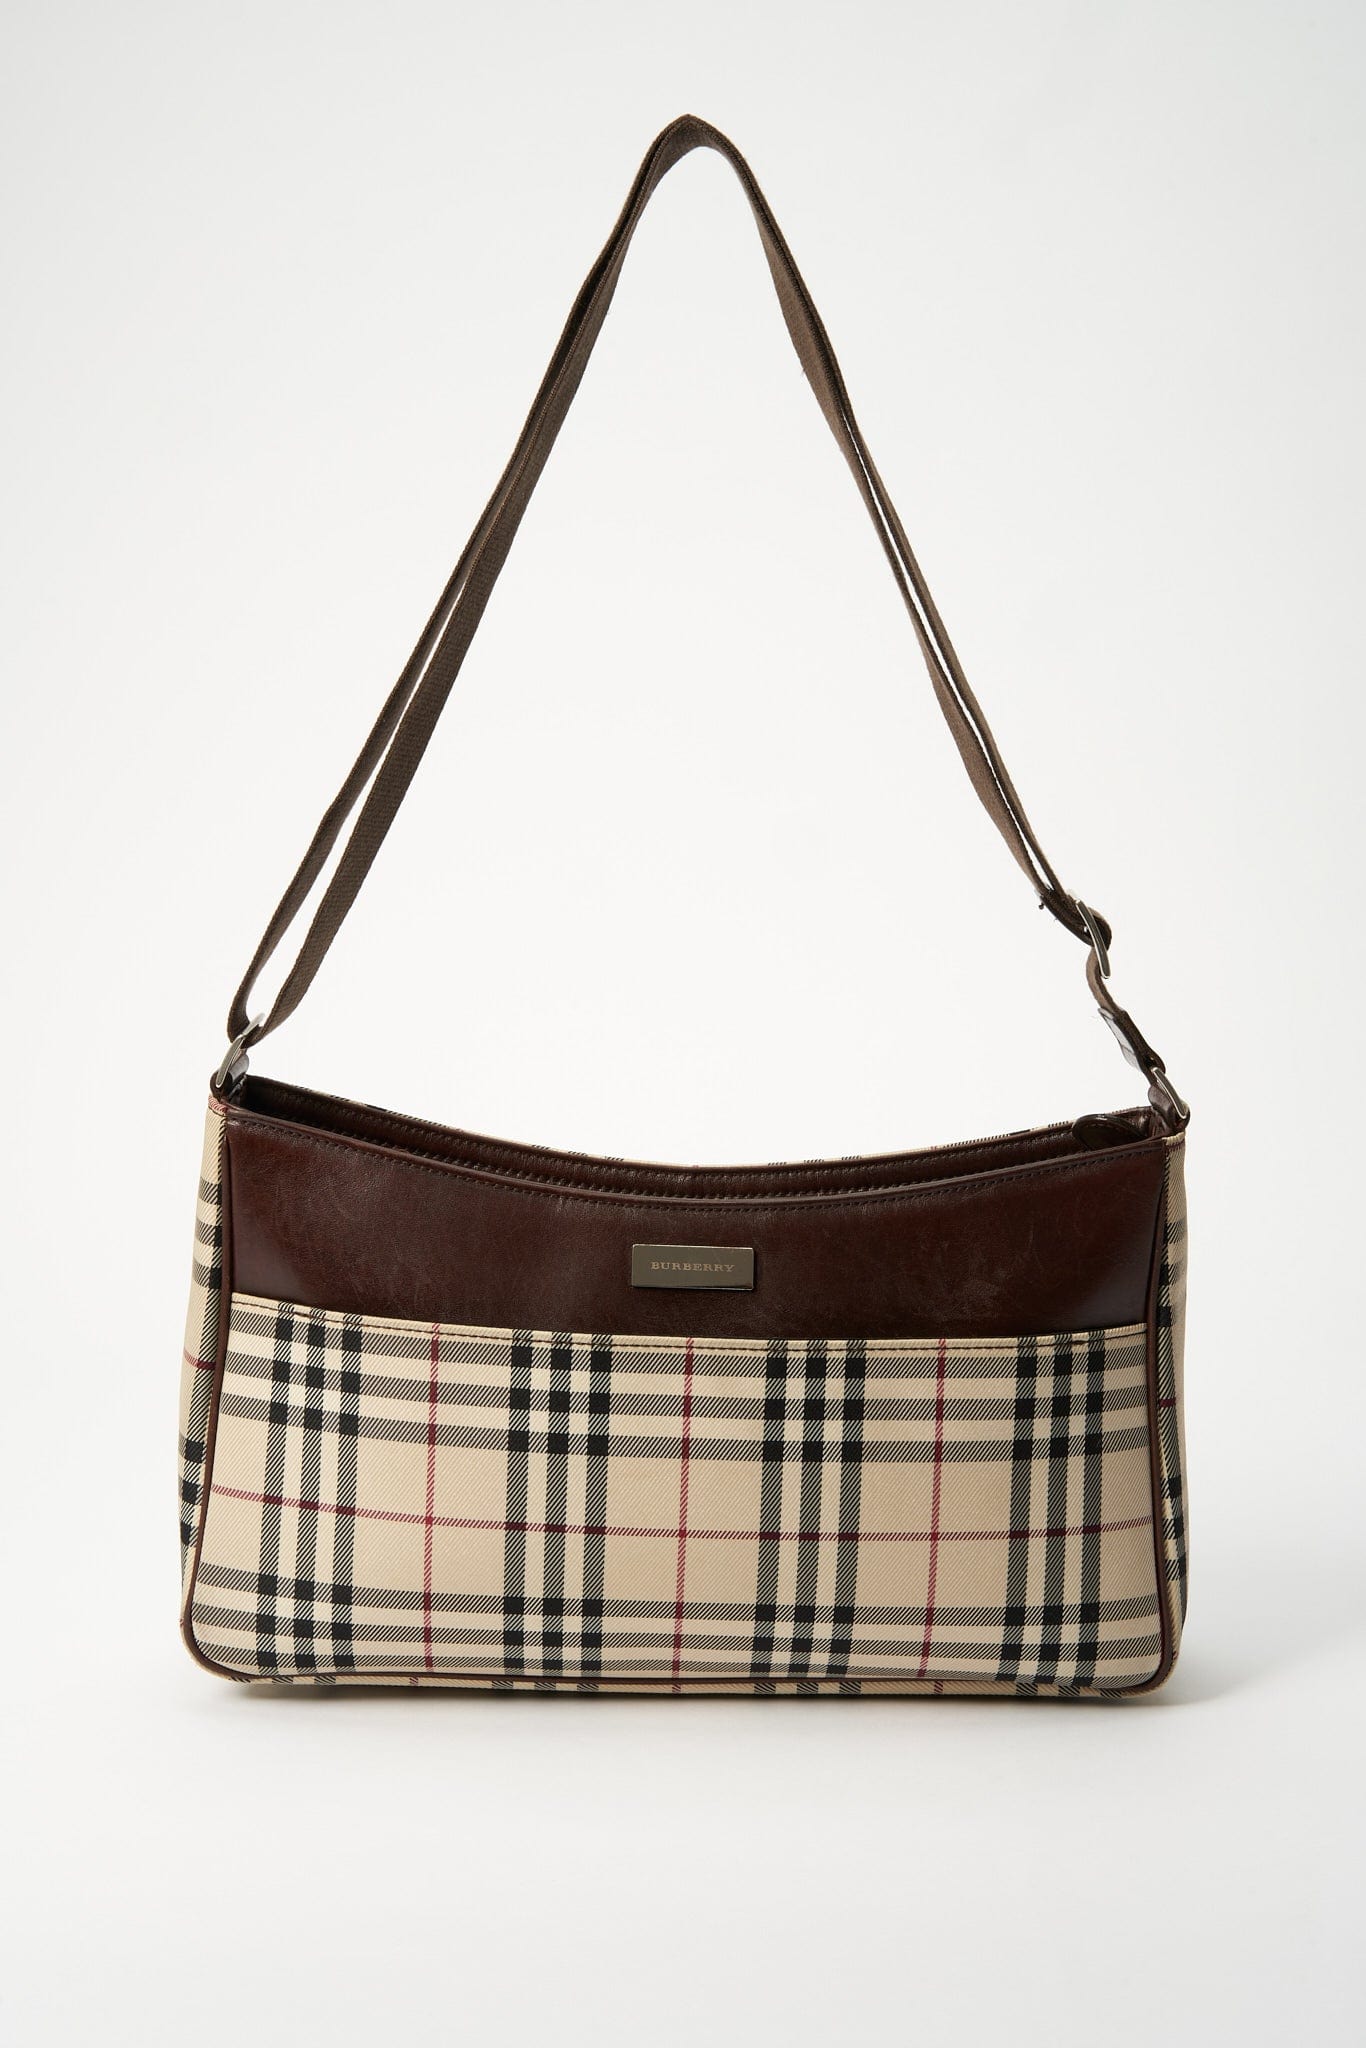 Burberry Brown Vintage Check Canvas and Leather Society Top Handle Bag  Burberry